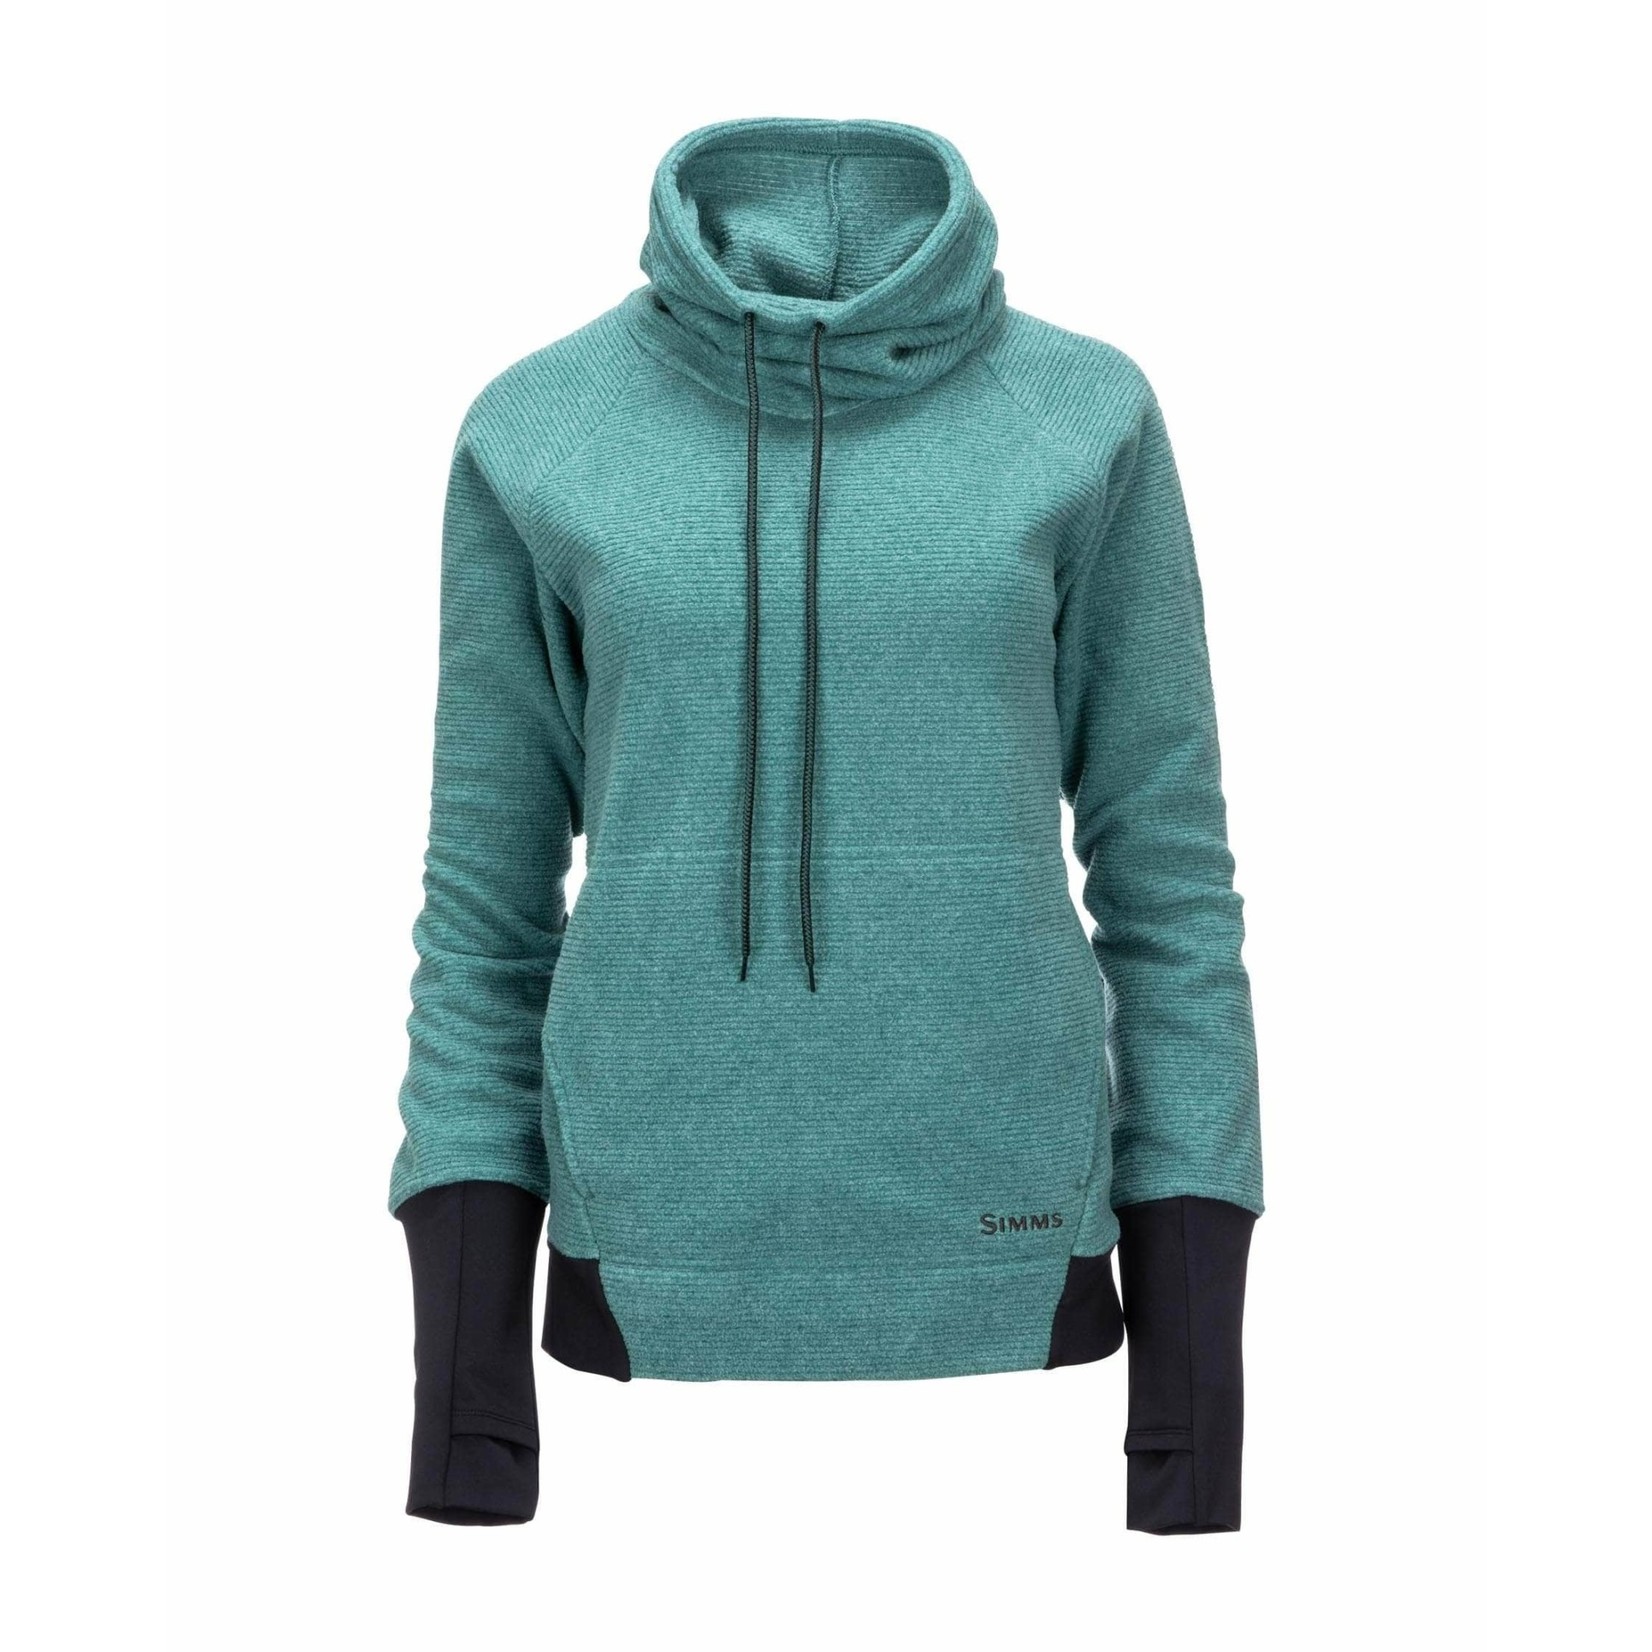 Simms Rivershed Sweater Woman's Avalon Teal - Black Dog Outdoor Sports